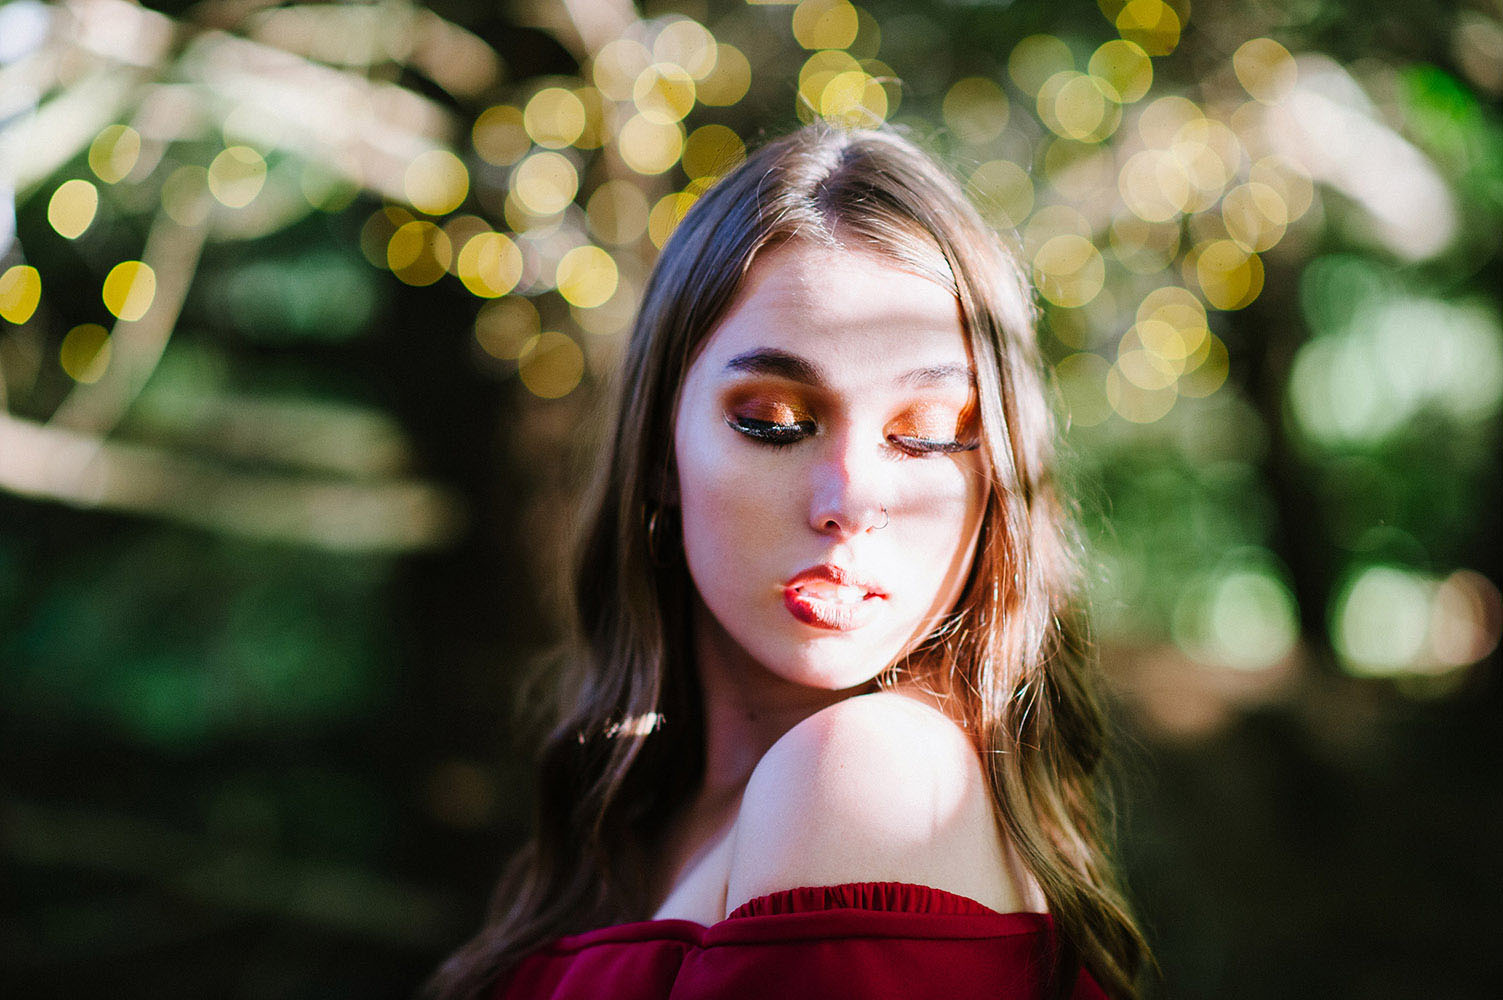 Girl with long brown hair and off the shoulder dark red top looking down with umber eye shadow and lipstick and bokeh lights background